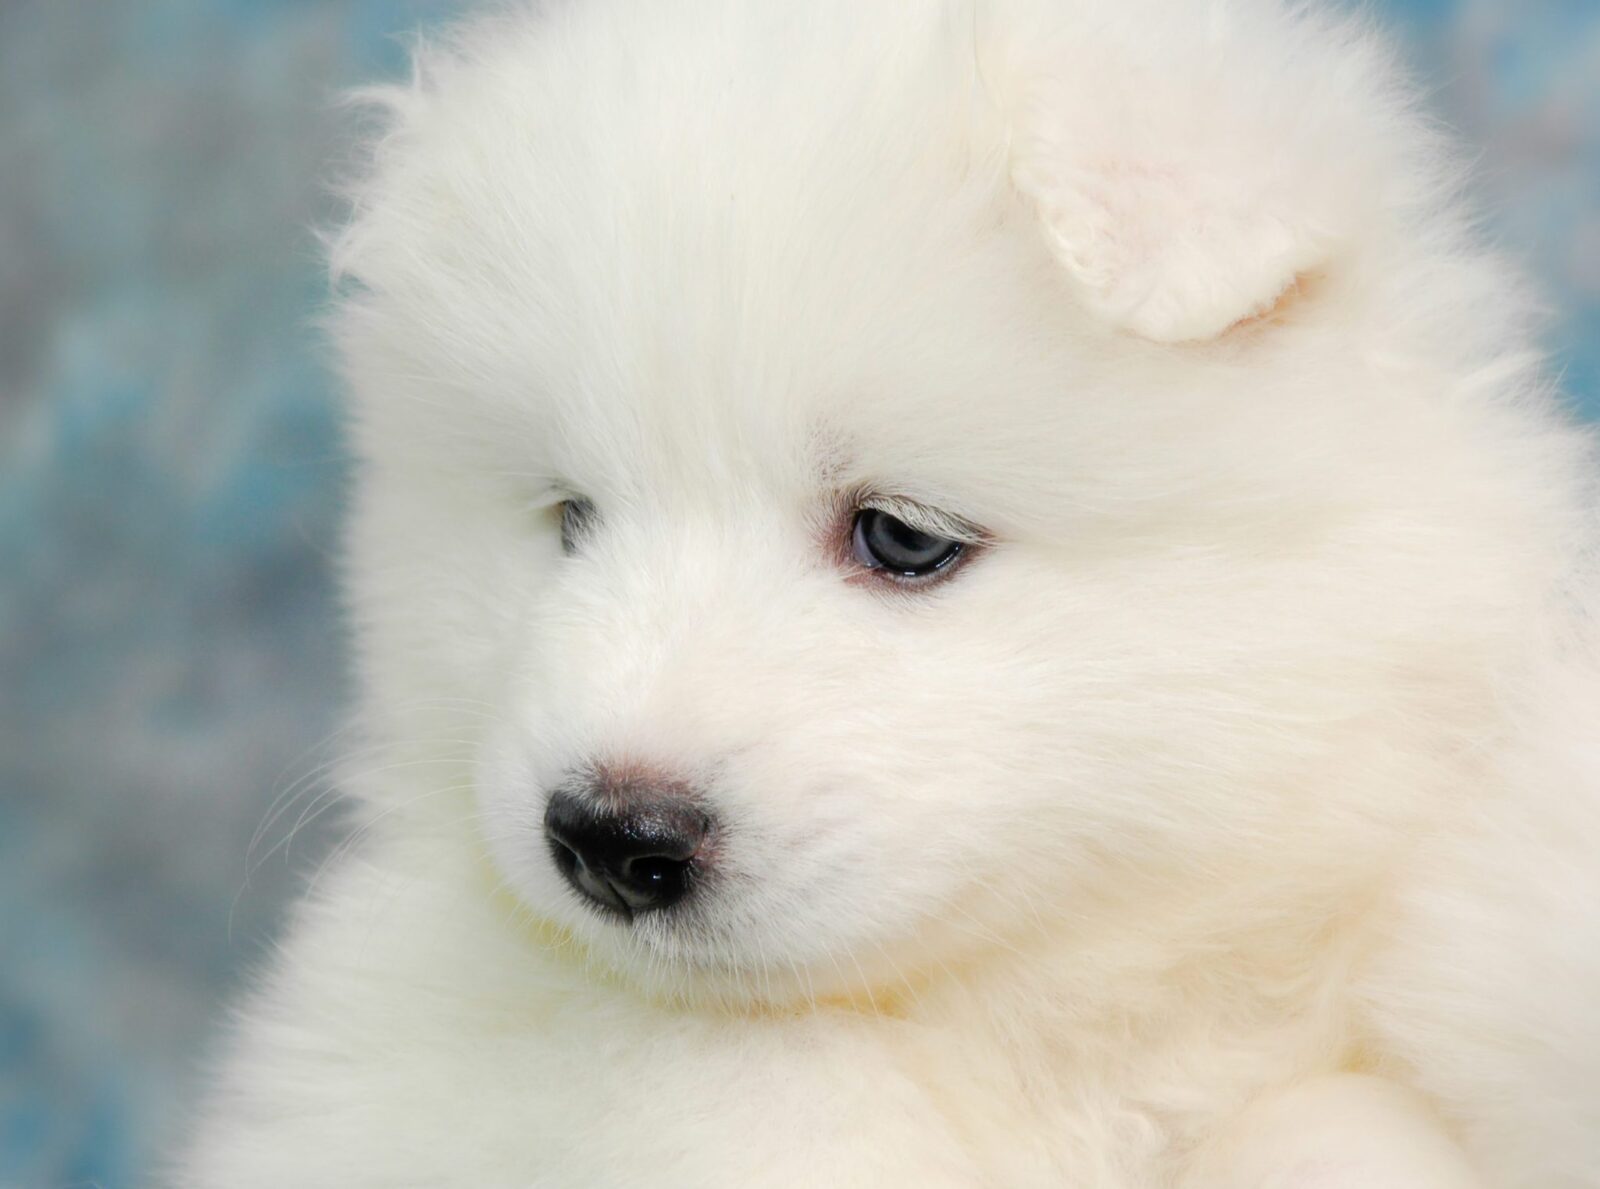 This 🐕 Dog Breeds Quiz May Be a Liiiittle Challenging, But Let’s See If You Can Score 15/20 Samoyed Puppy